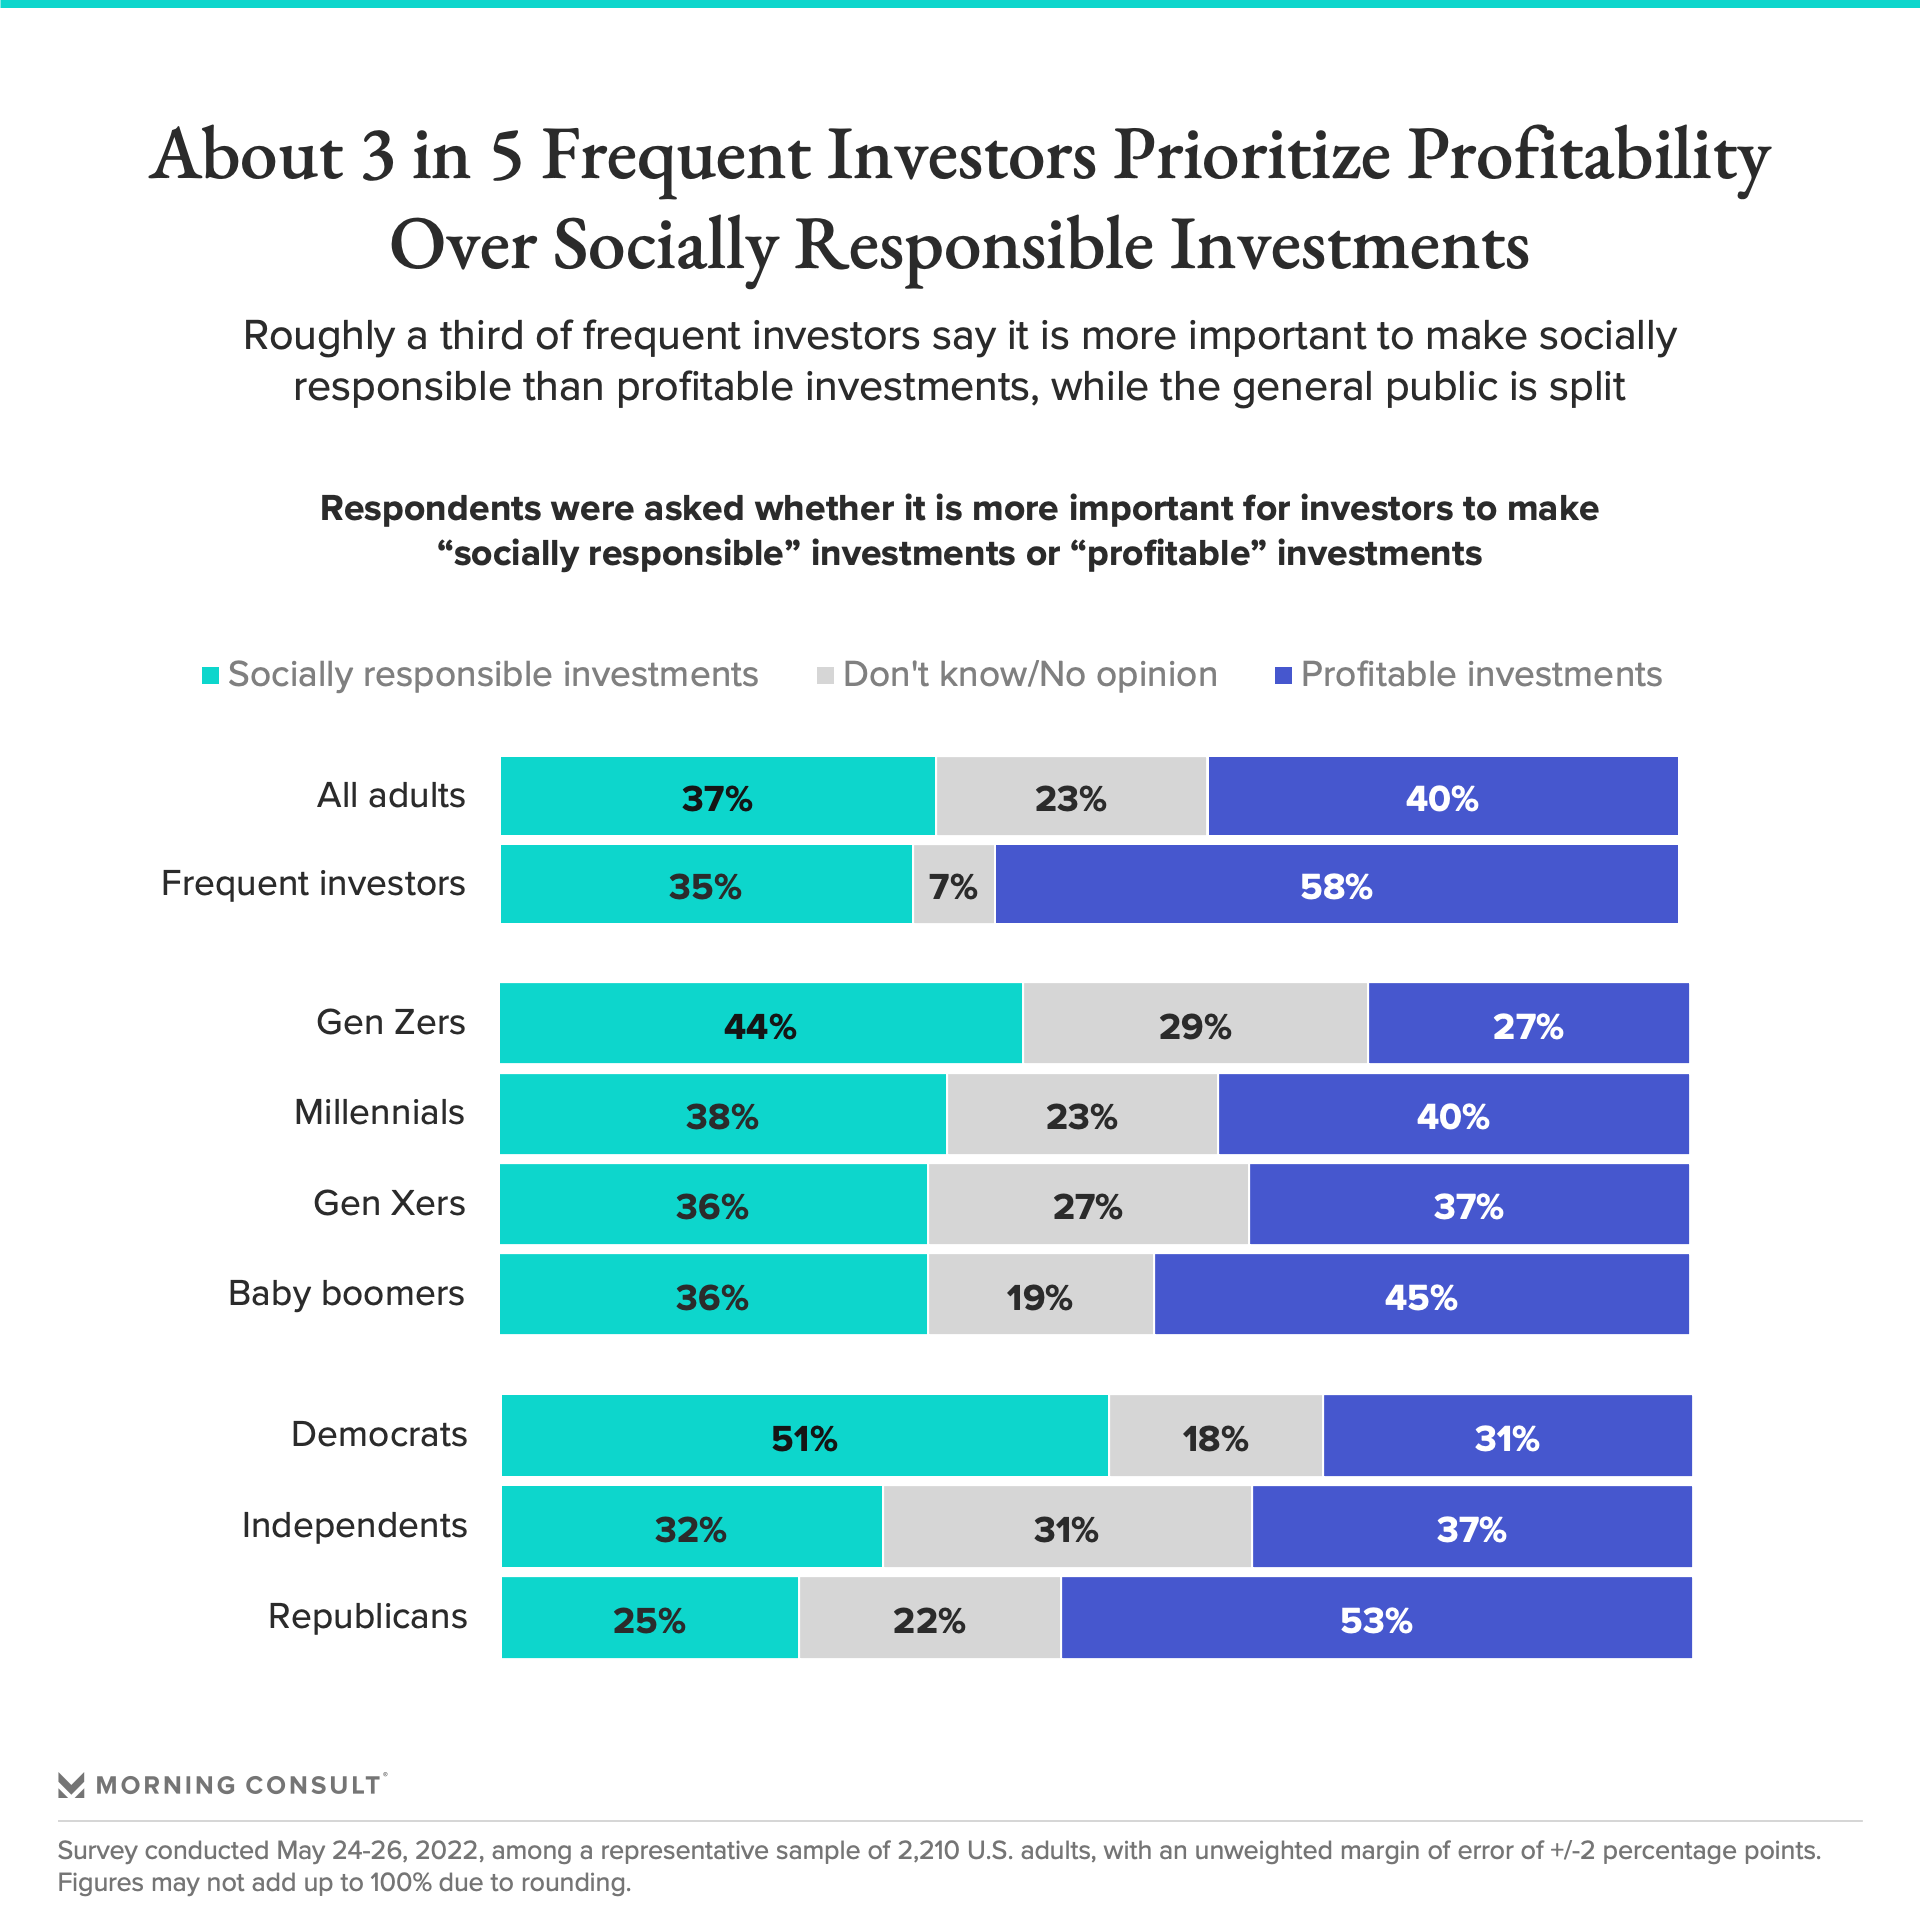 Chart conveying whether the public prioritizes profitability over social responsibility in investments